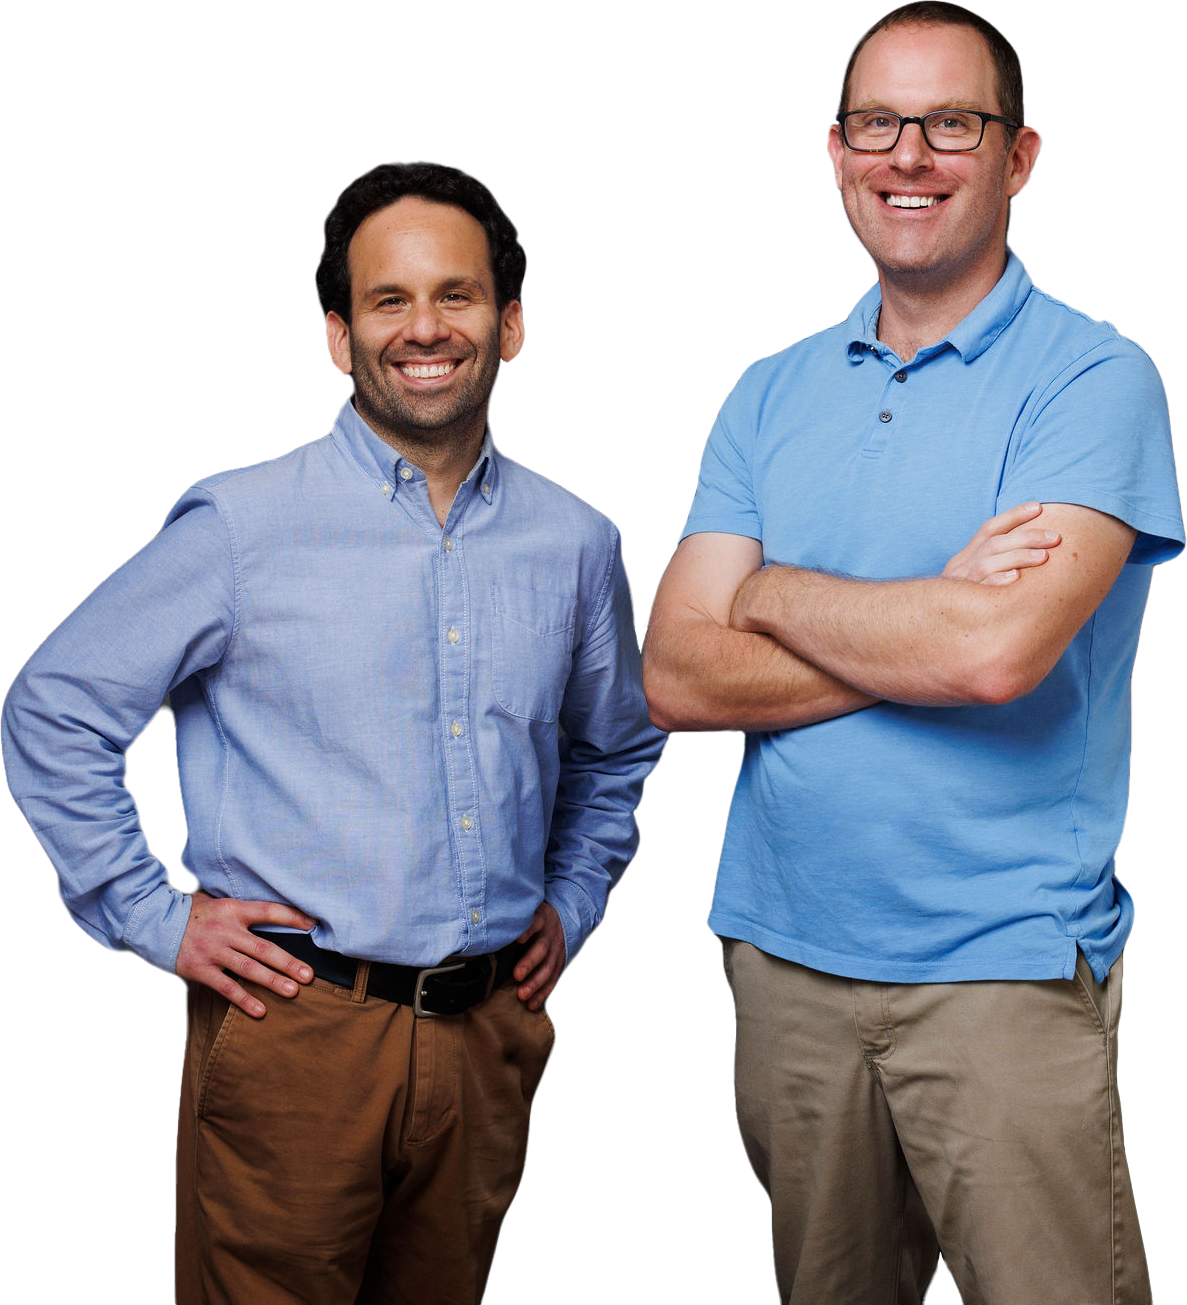 Mickey and Brian Kellerman, Co-founders of Kellerman Consulting standing together wearing blue shirts and smiling.